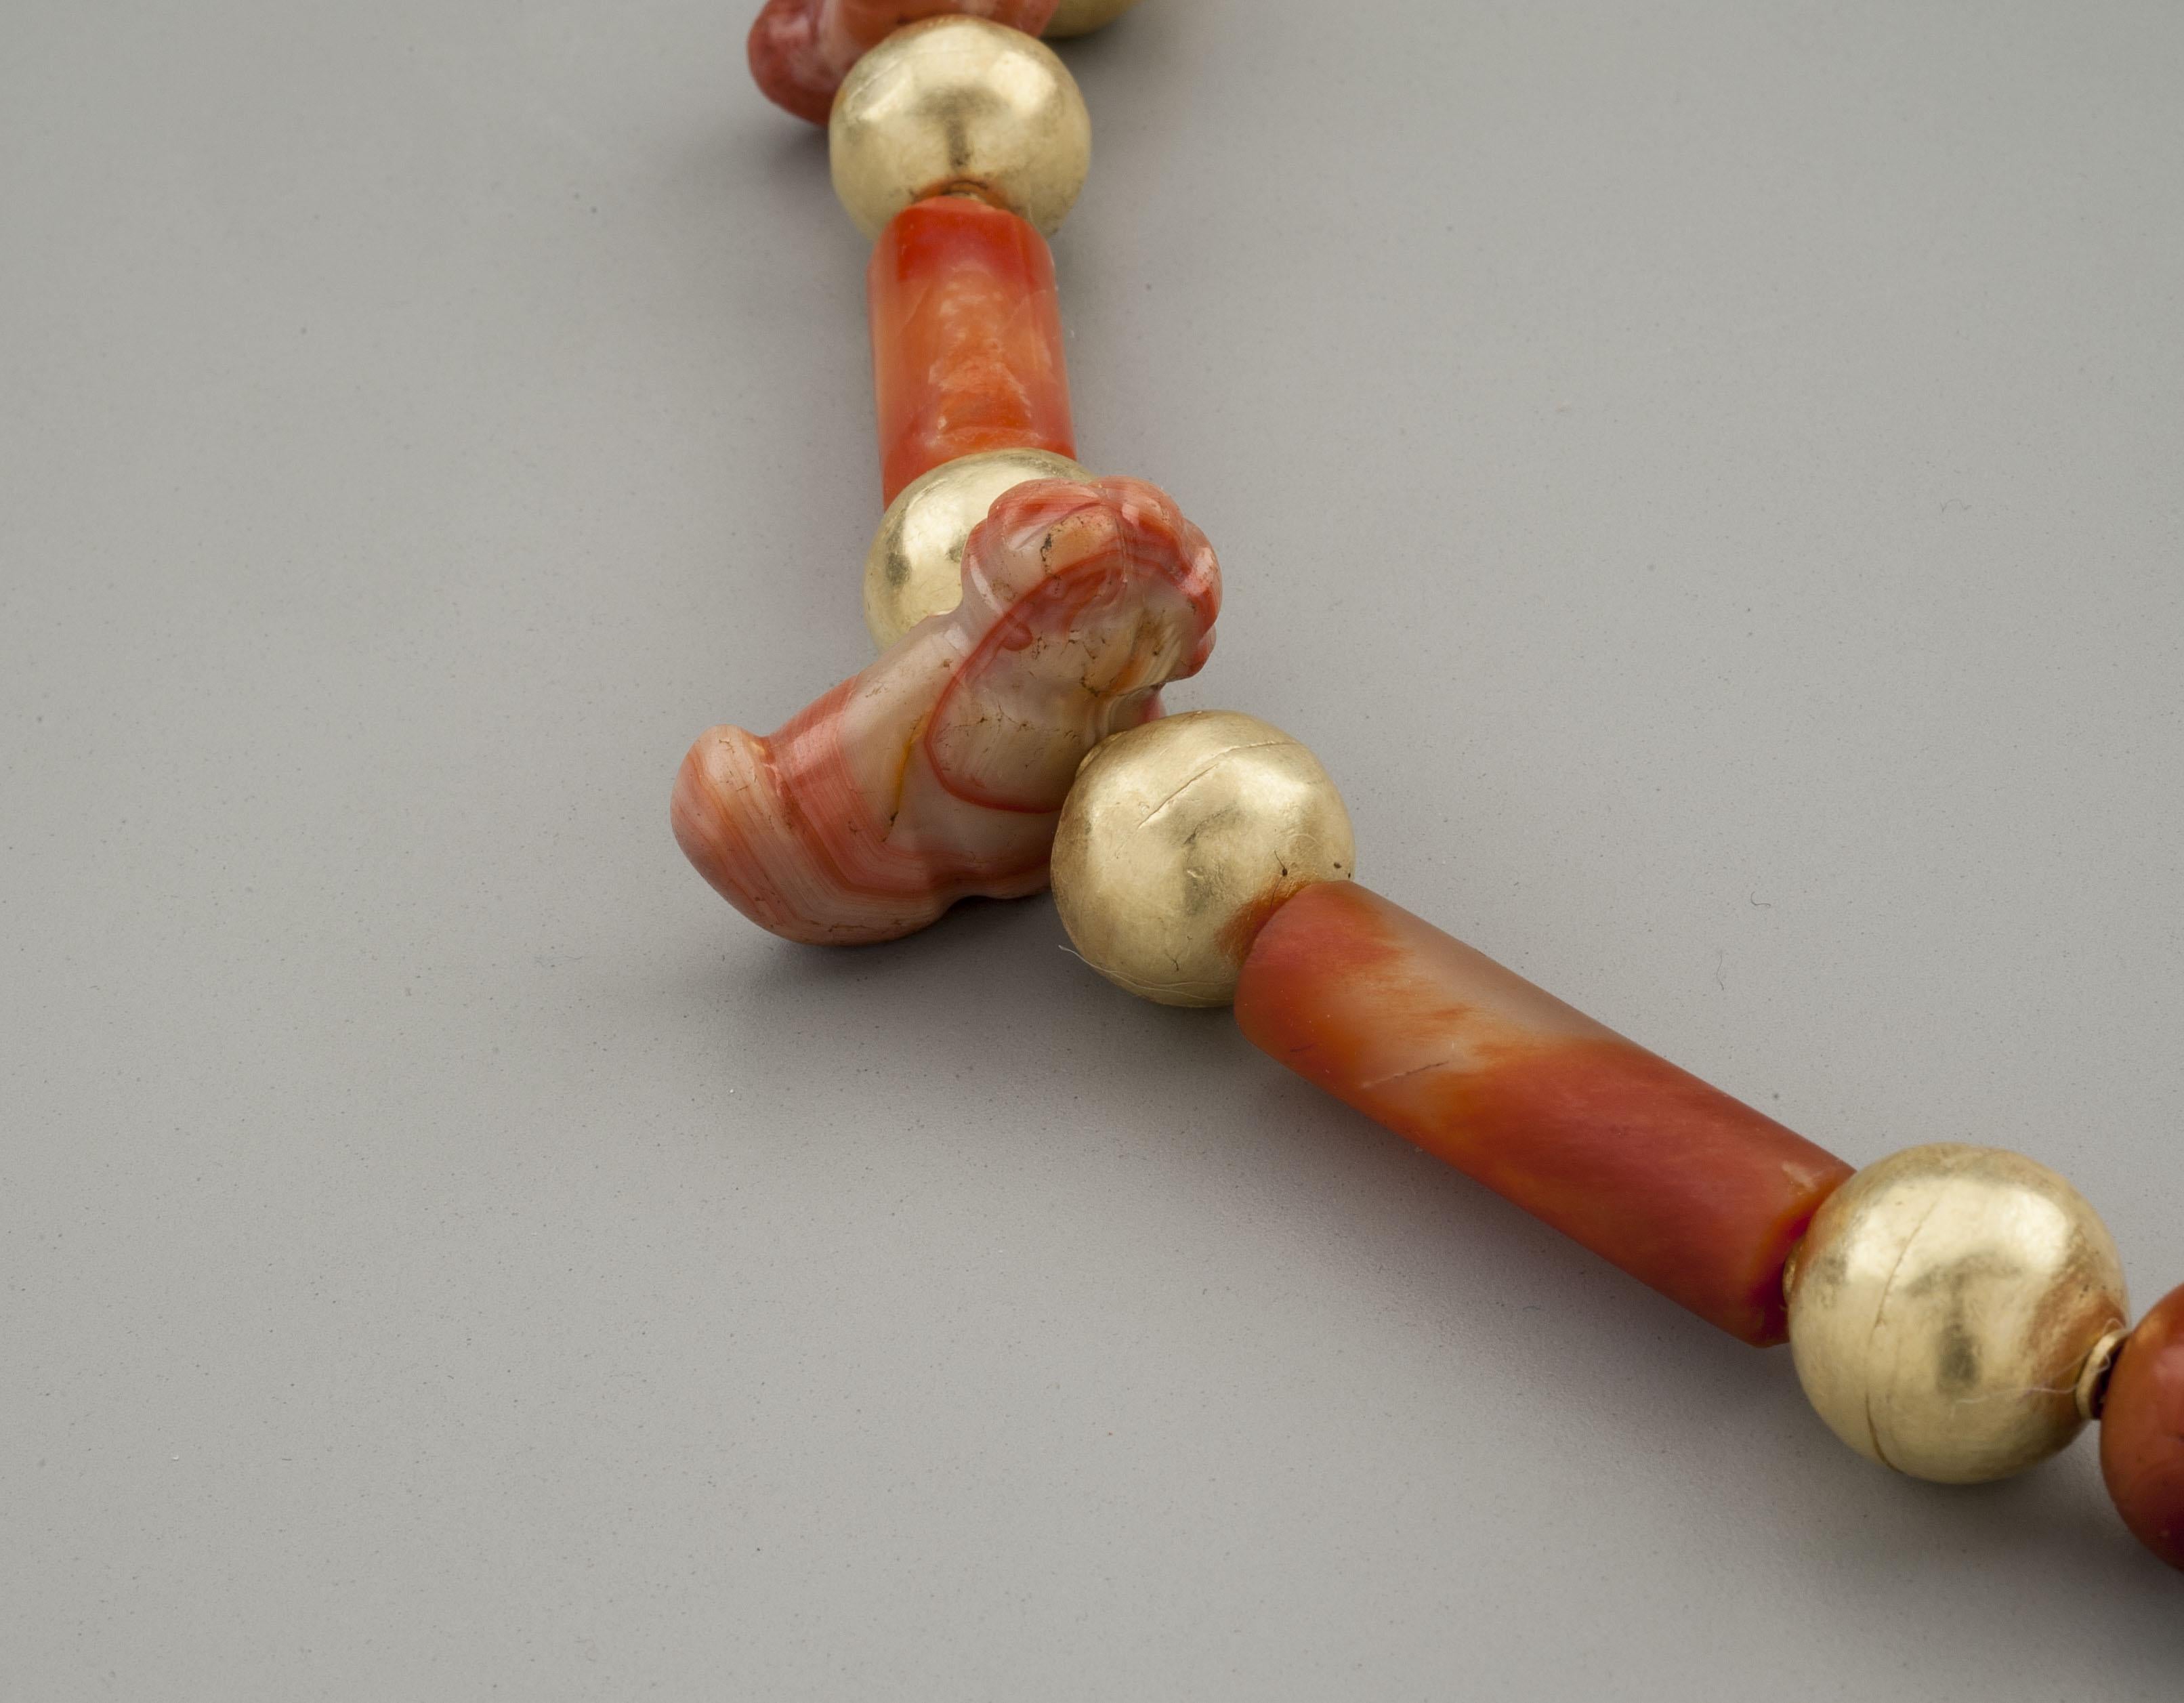 Five carnelian amulets in the form of larva or grubs, inter-spaced with fourteen carnelian beads, both round and cylindrical, alternating with sixteen large round collared spherical gold beads. Two more spheres form beading tips and there is an